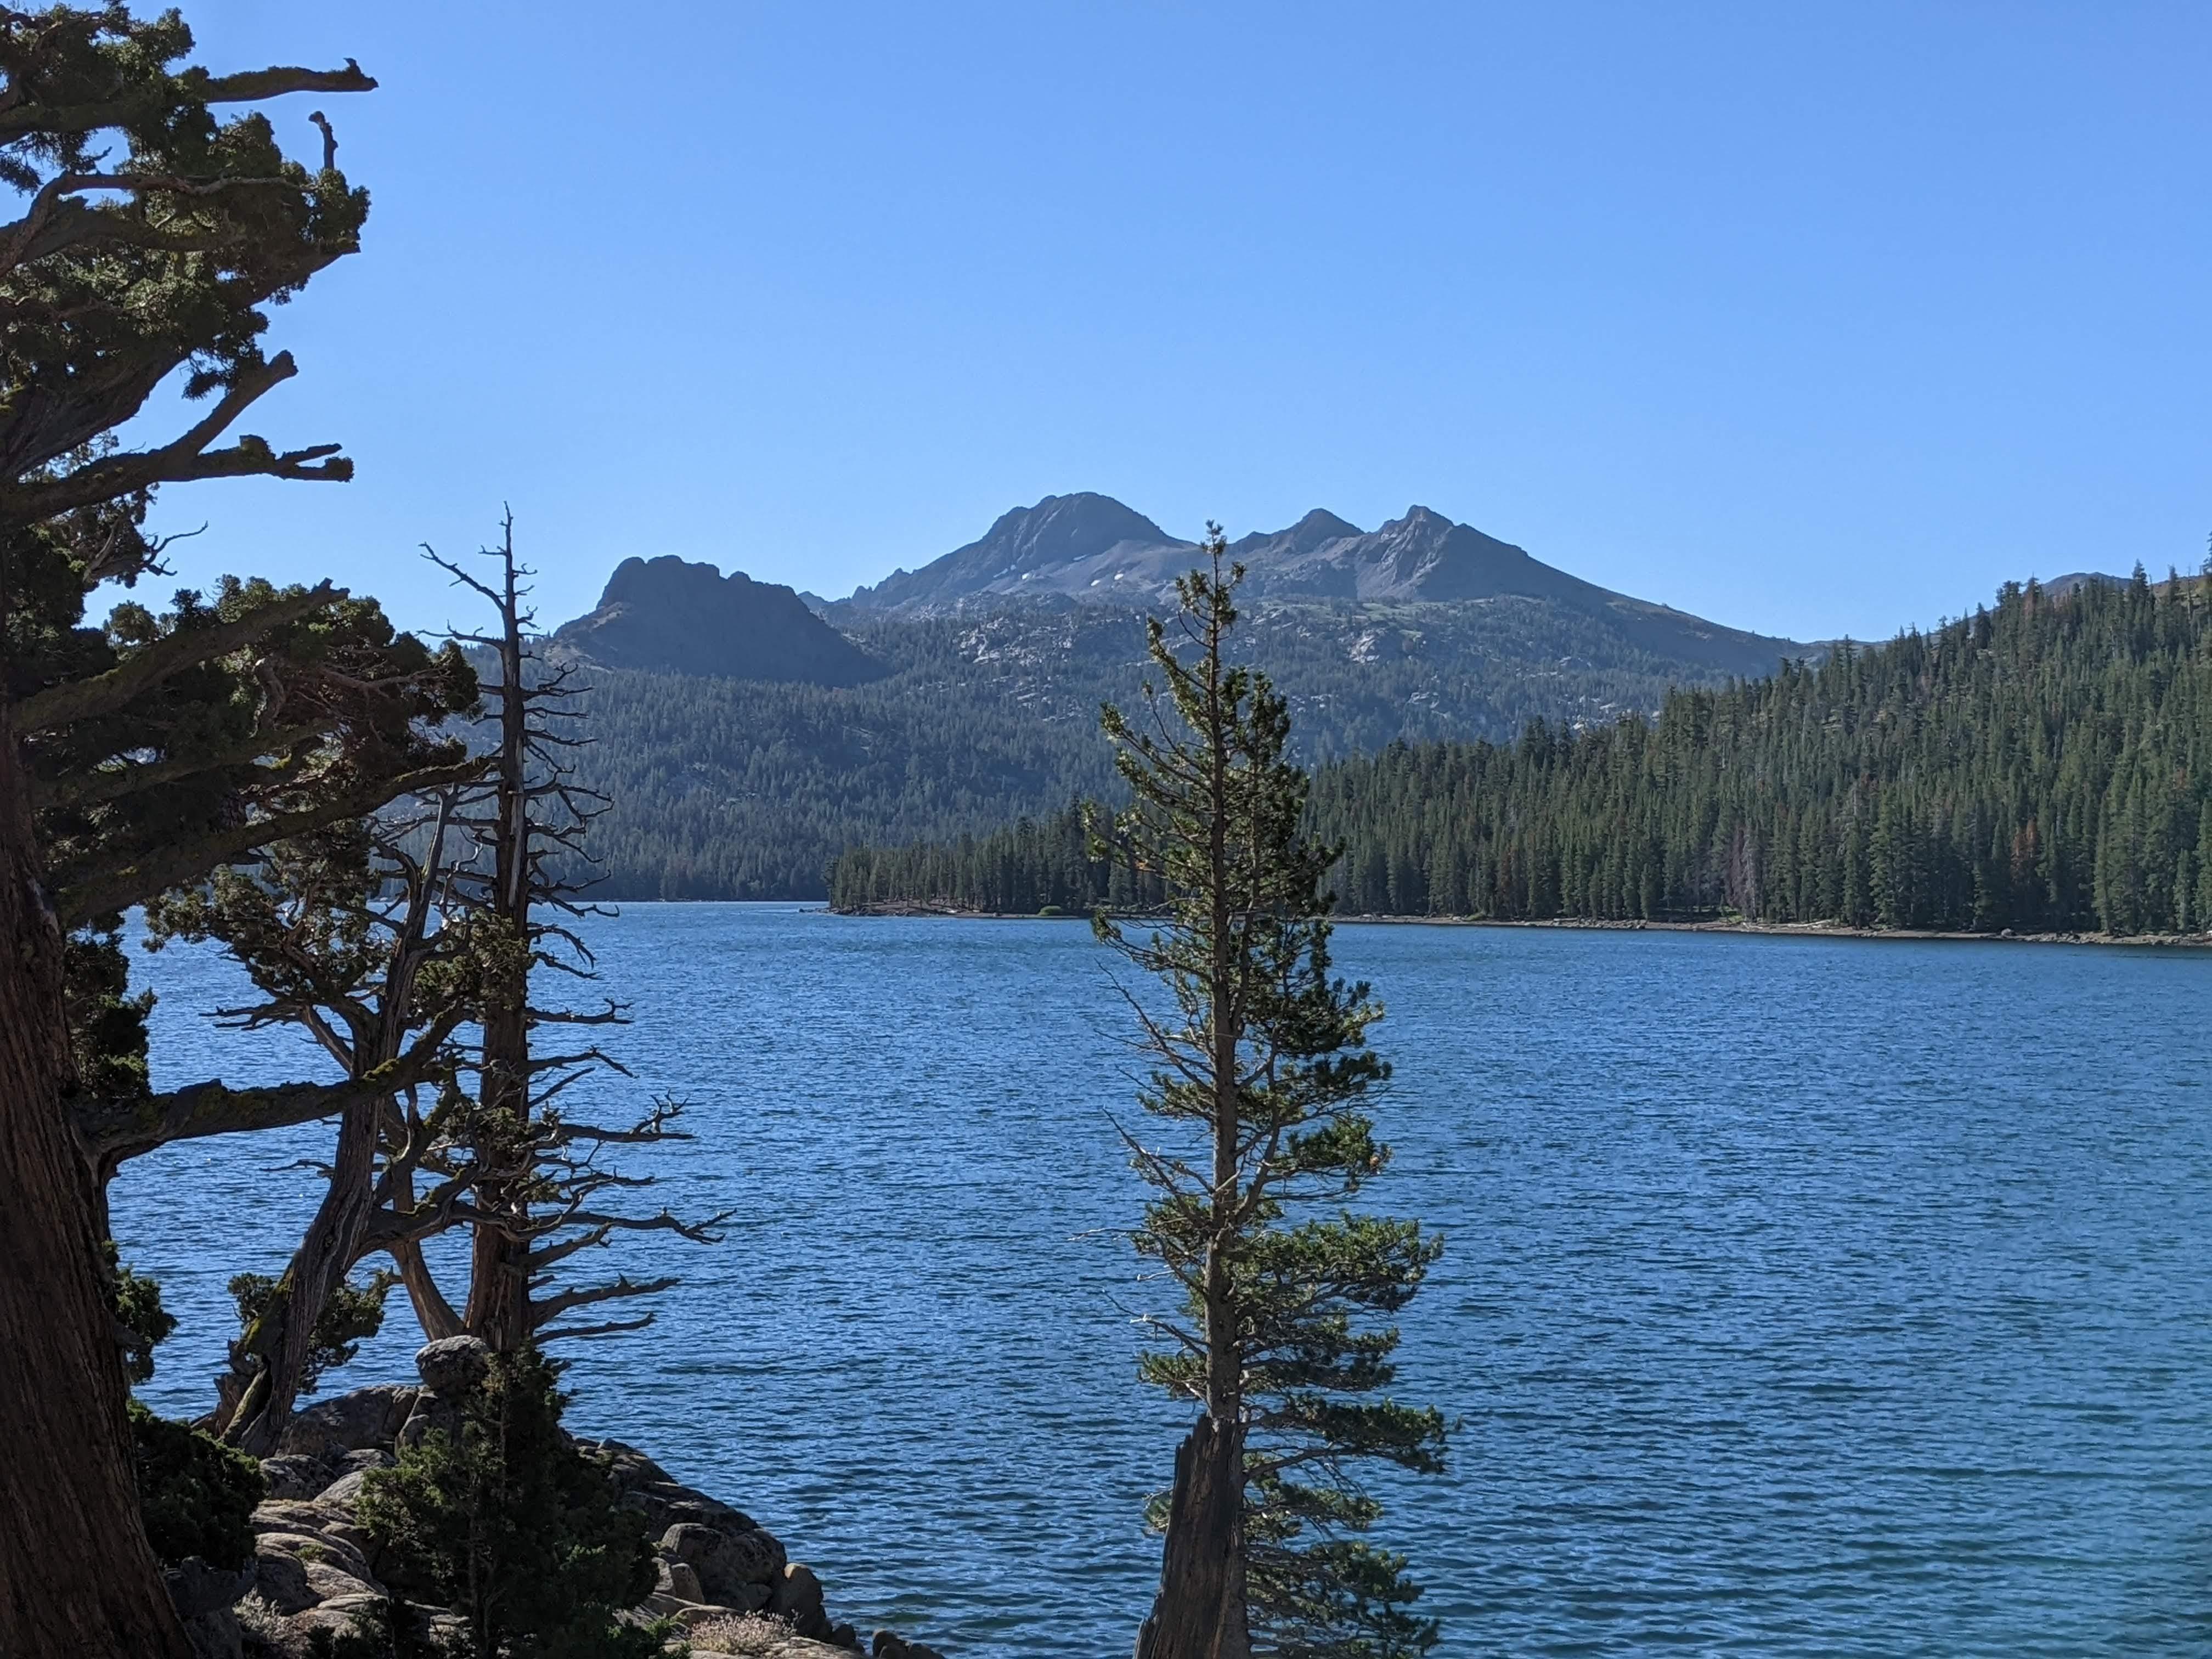 Black Butte and Round top as seen from the shore of Caples lake